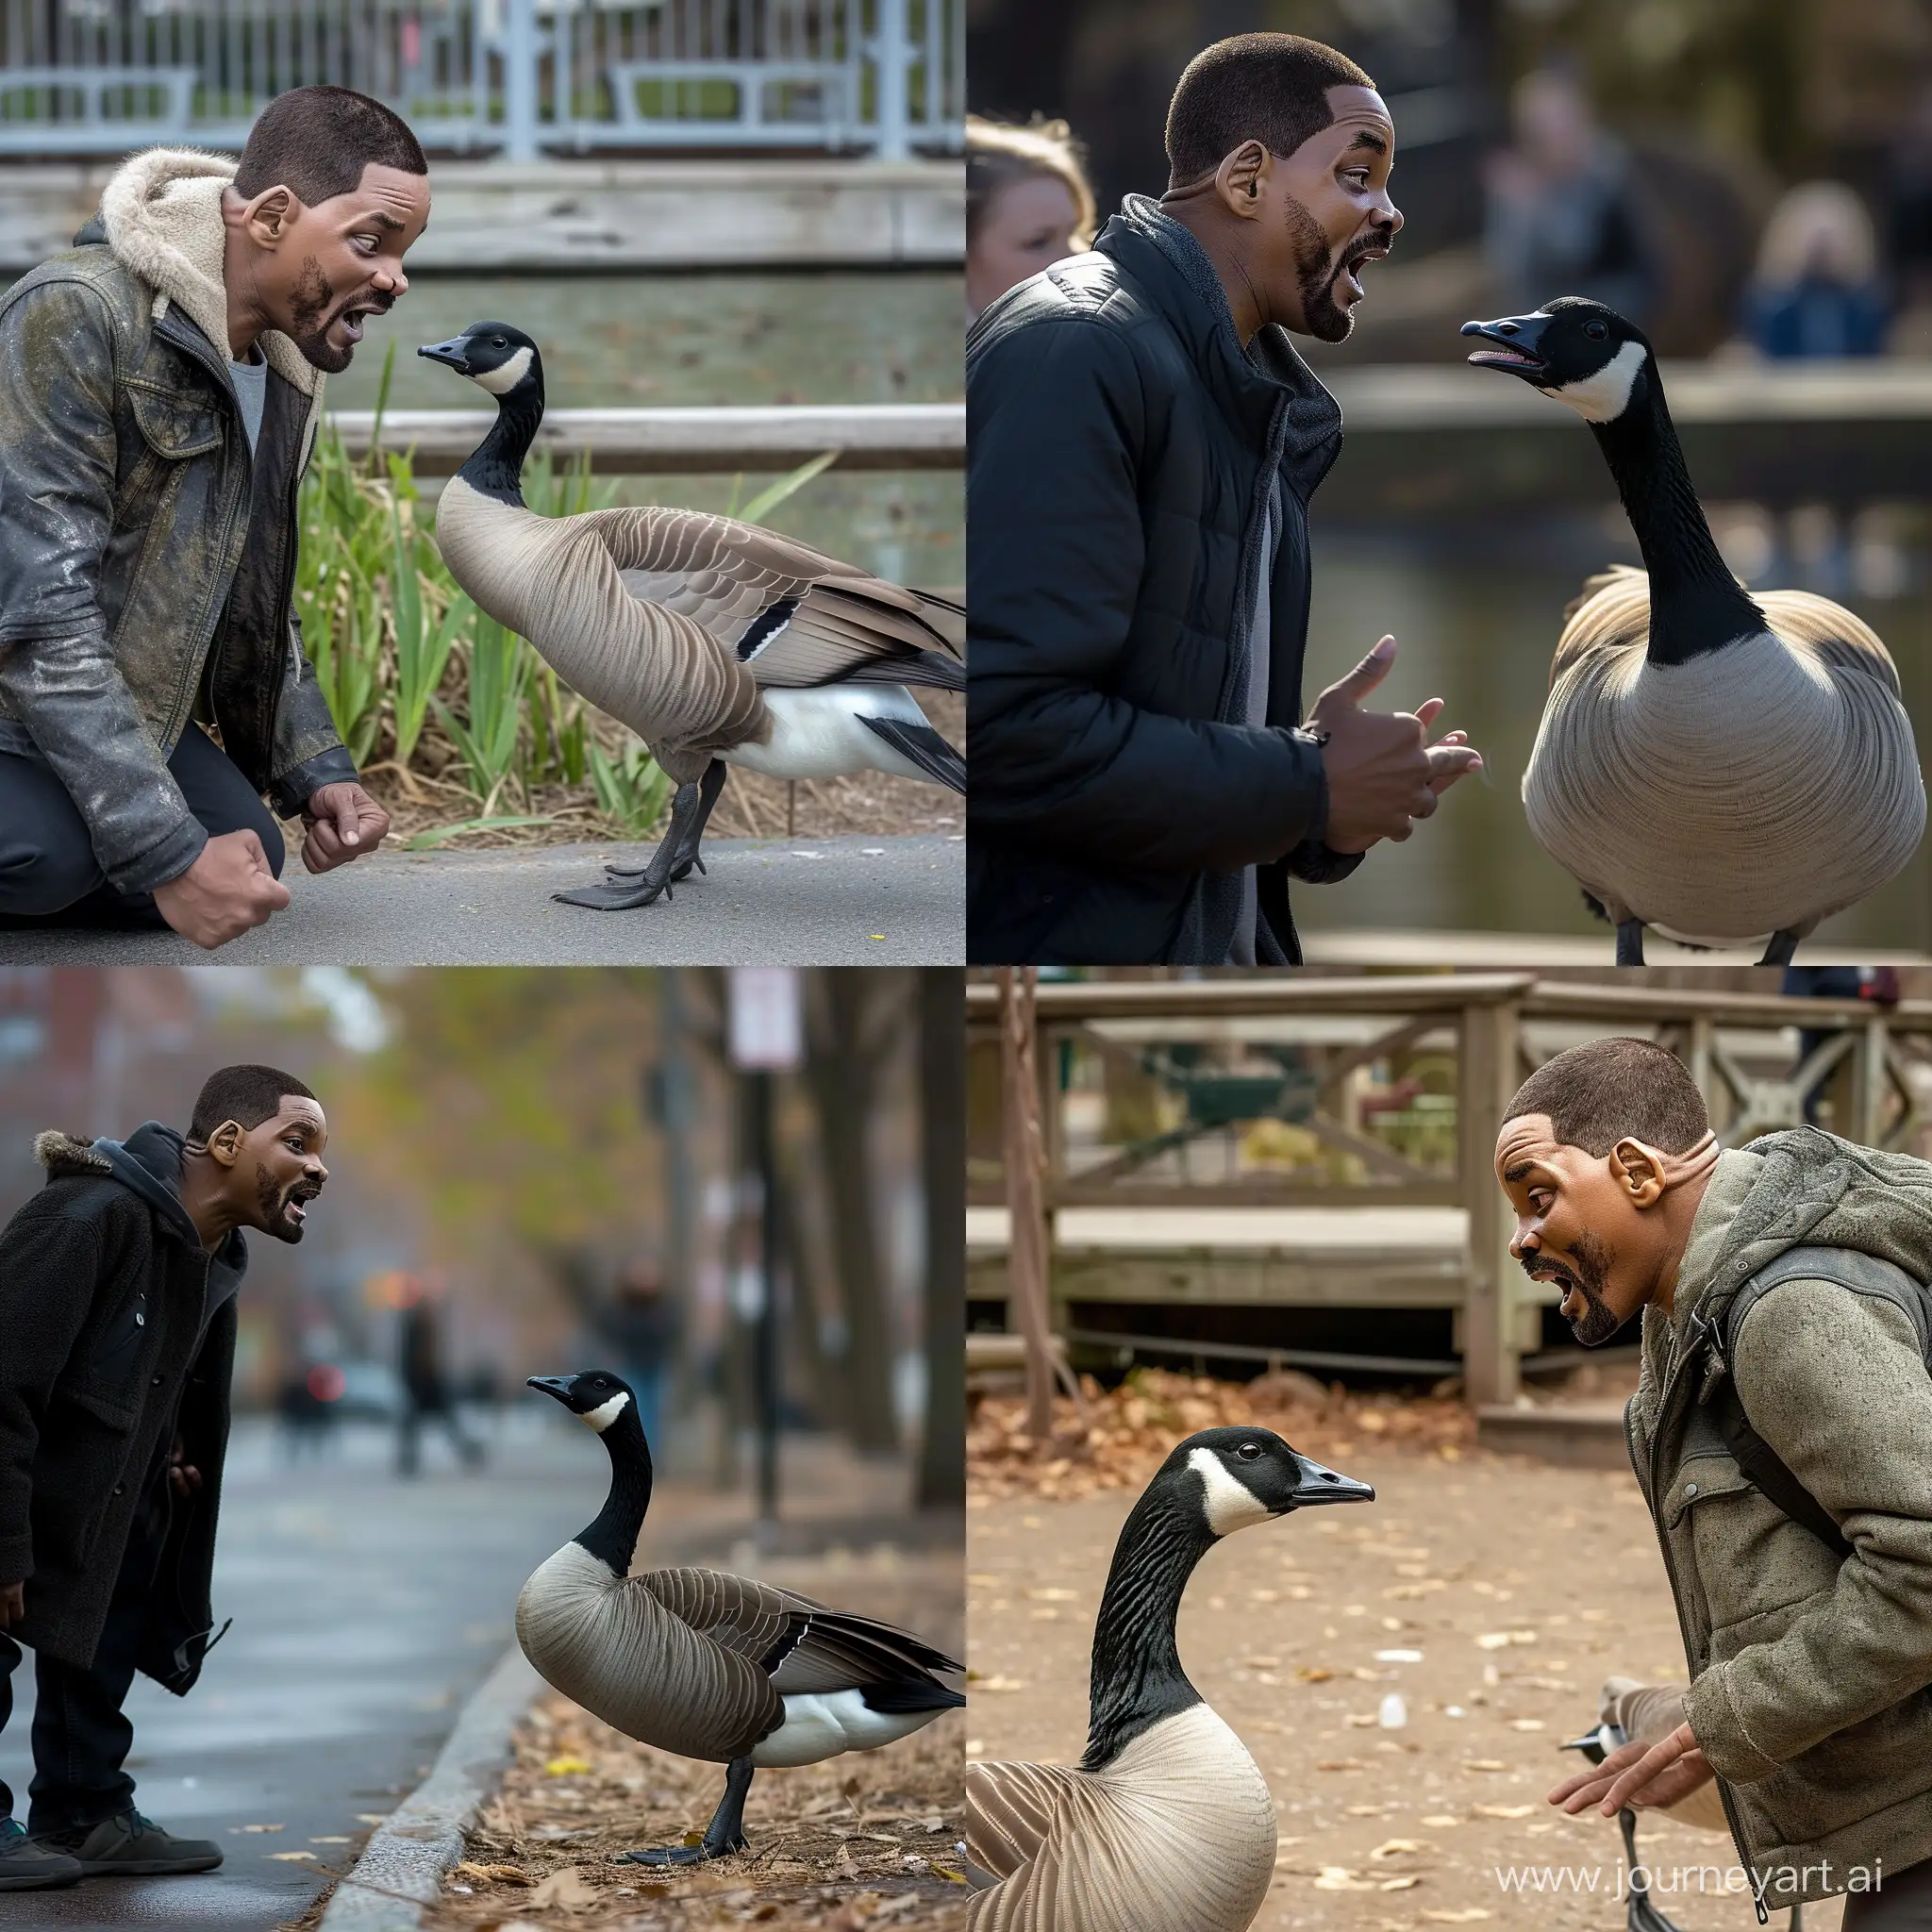 Paparazzi photo of Will Smith in a standoff with a Canada goose, he is emotionally yelling at the goose and the goose is honking back at him, they are about 6 feet apart